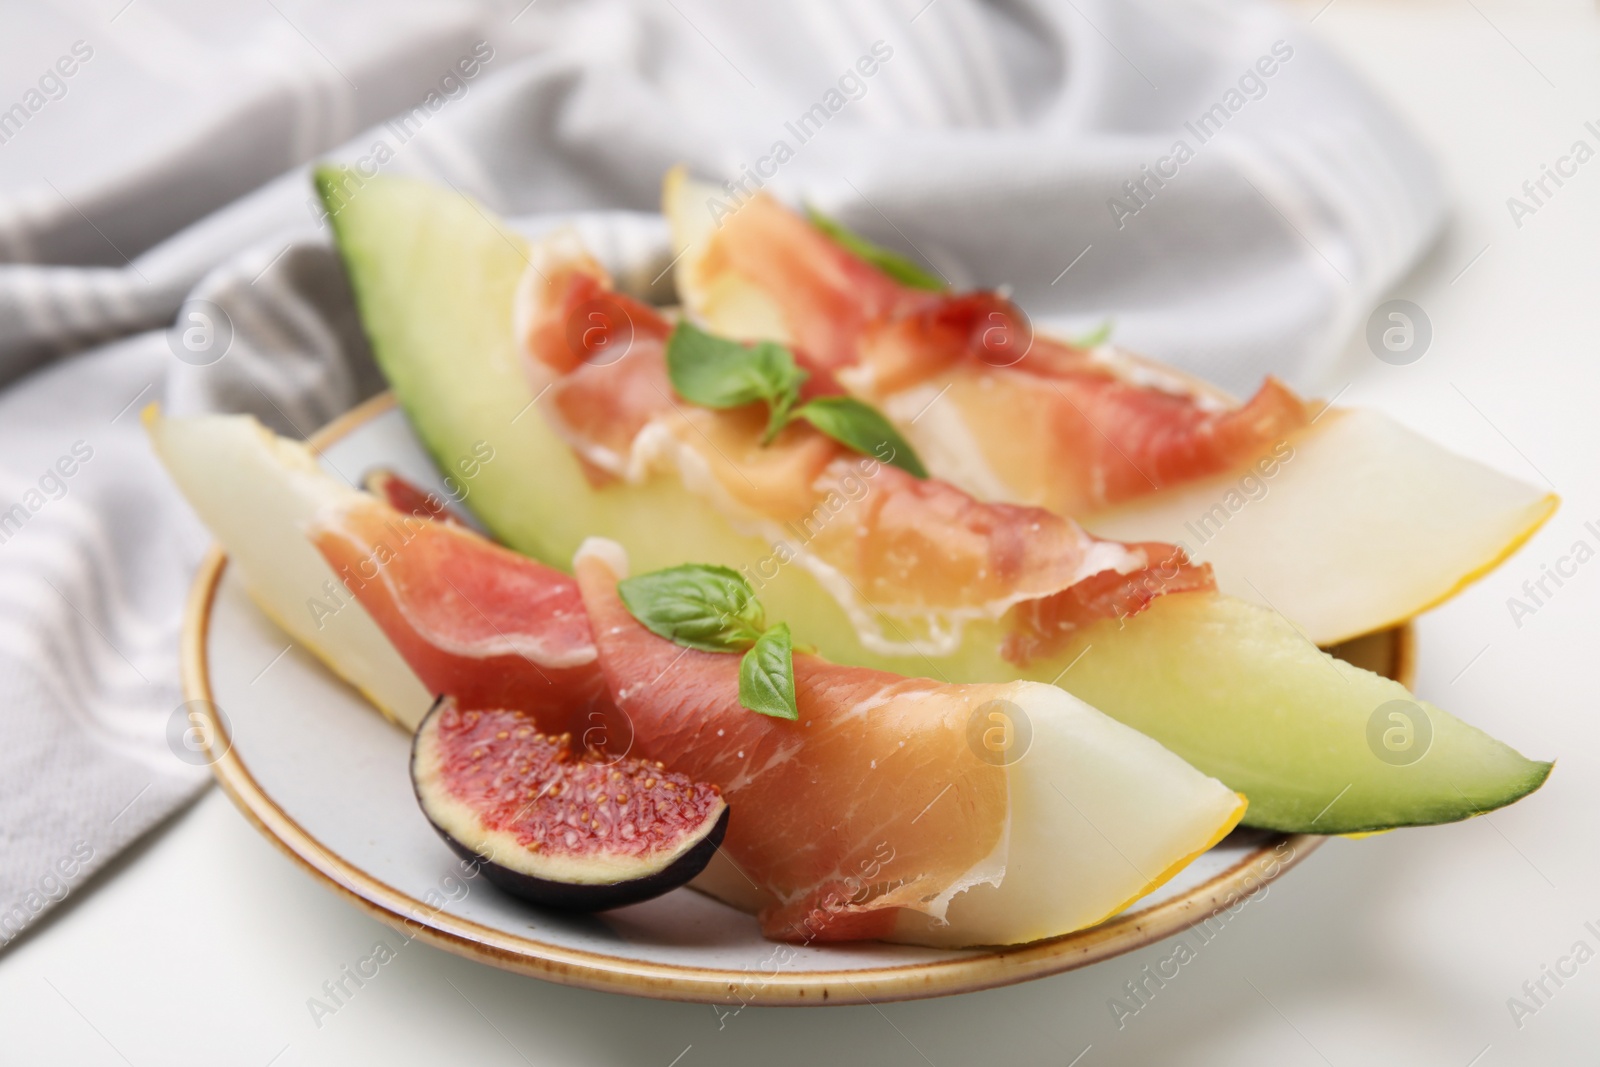 Photo of Plate of tasty melon, jamon, and figs on white table, closeup